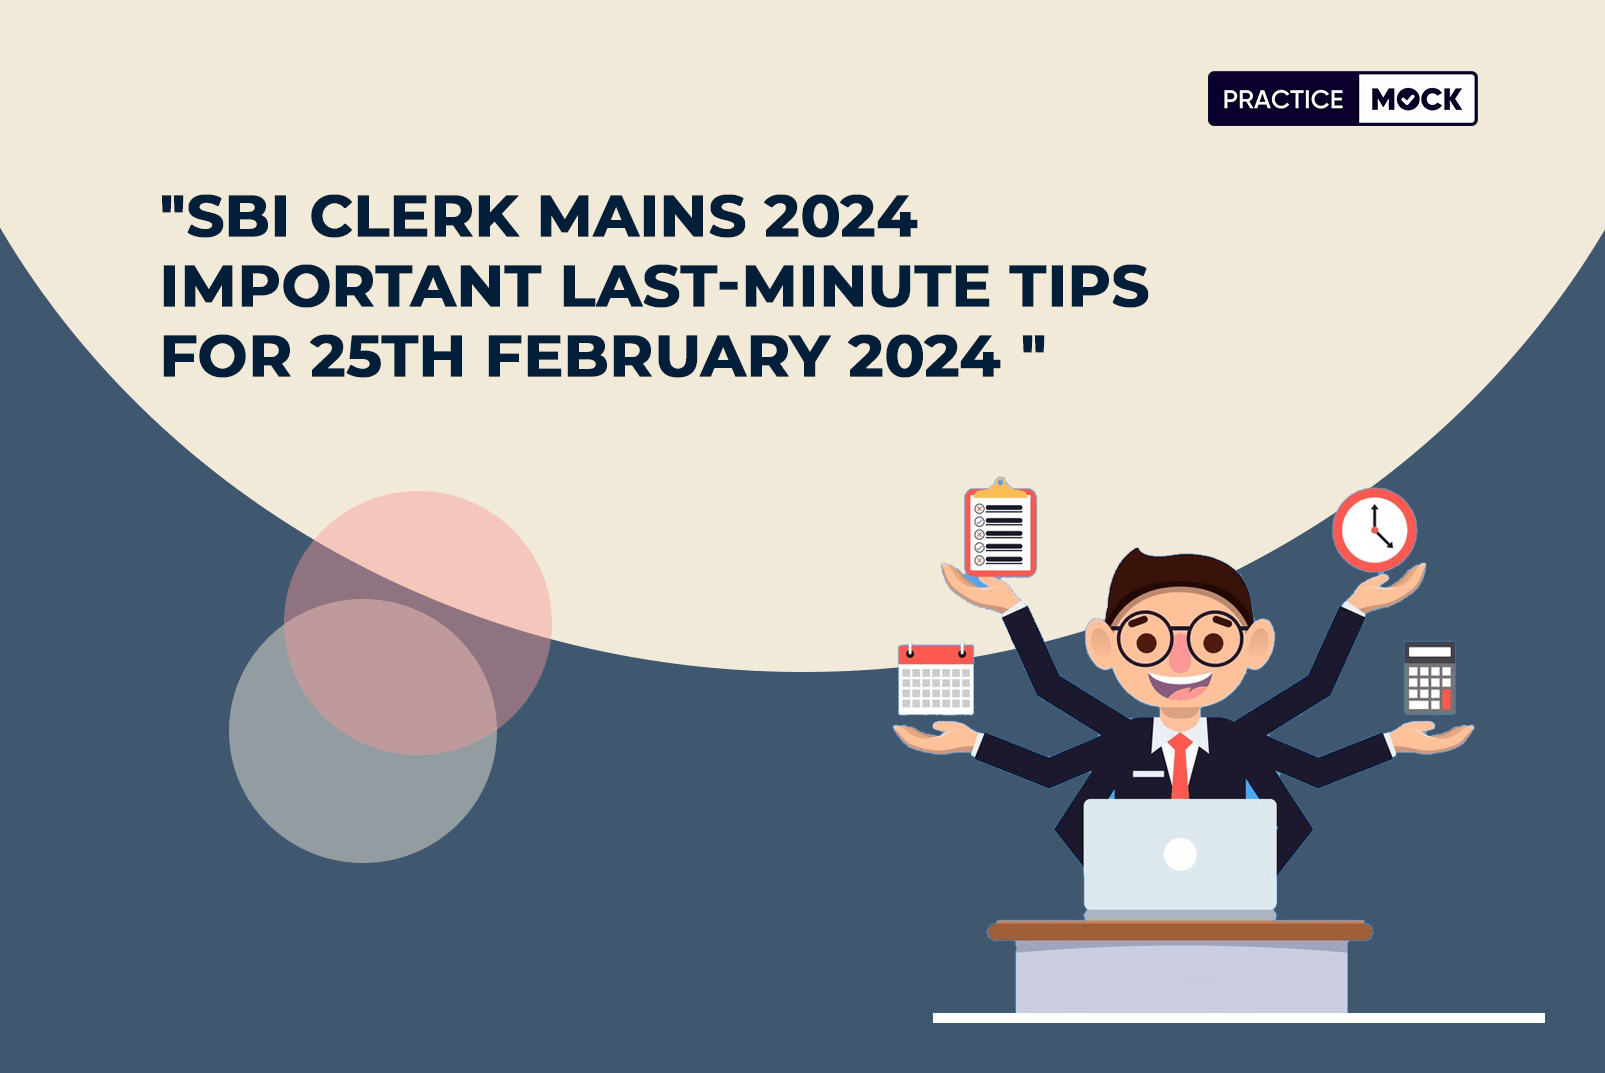 SBI Clerk Mains 2024 Important Last-Minute Tips for 25th February